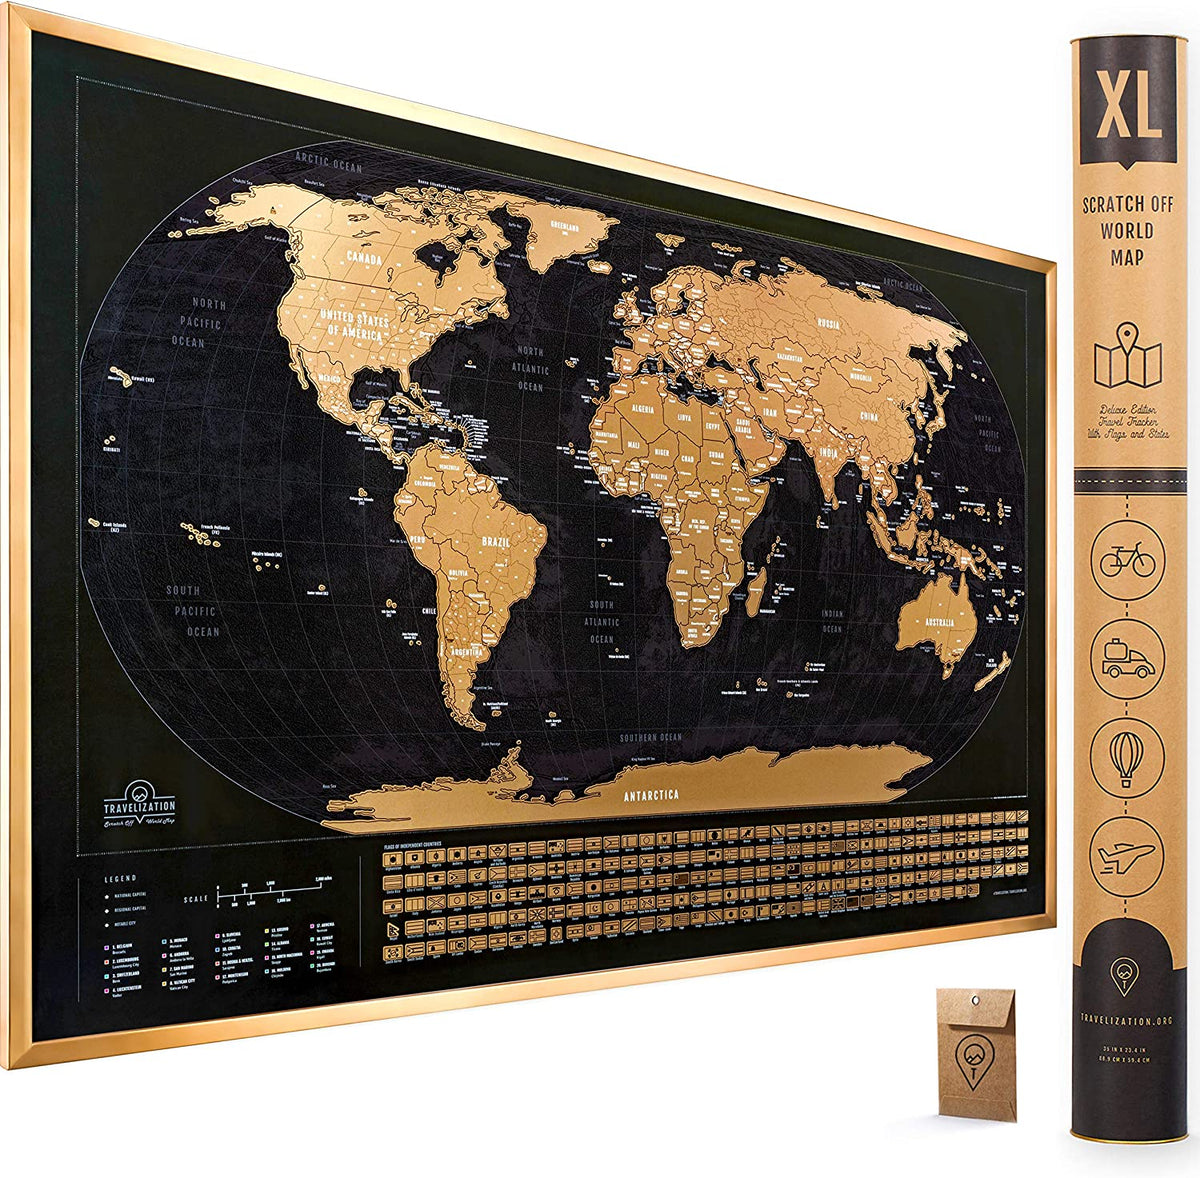 XL Scratch off World Map with All 233 Flags + Deluxe USA Scratch off Map |  36x24 Easy to Frame Travel Map Scratch off Poster | World Map Scratch off